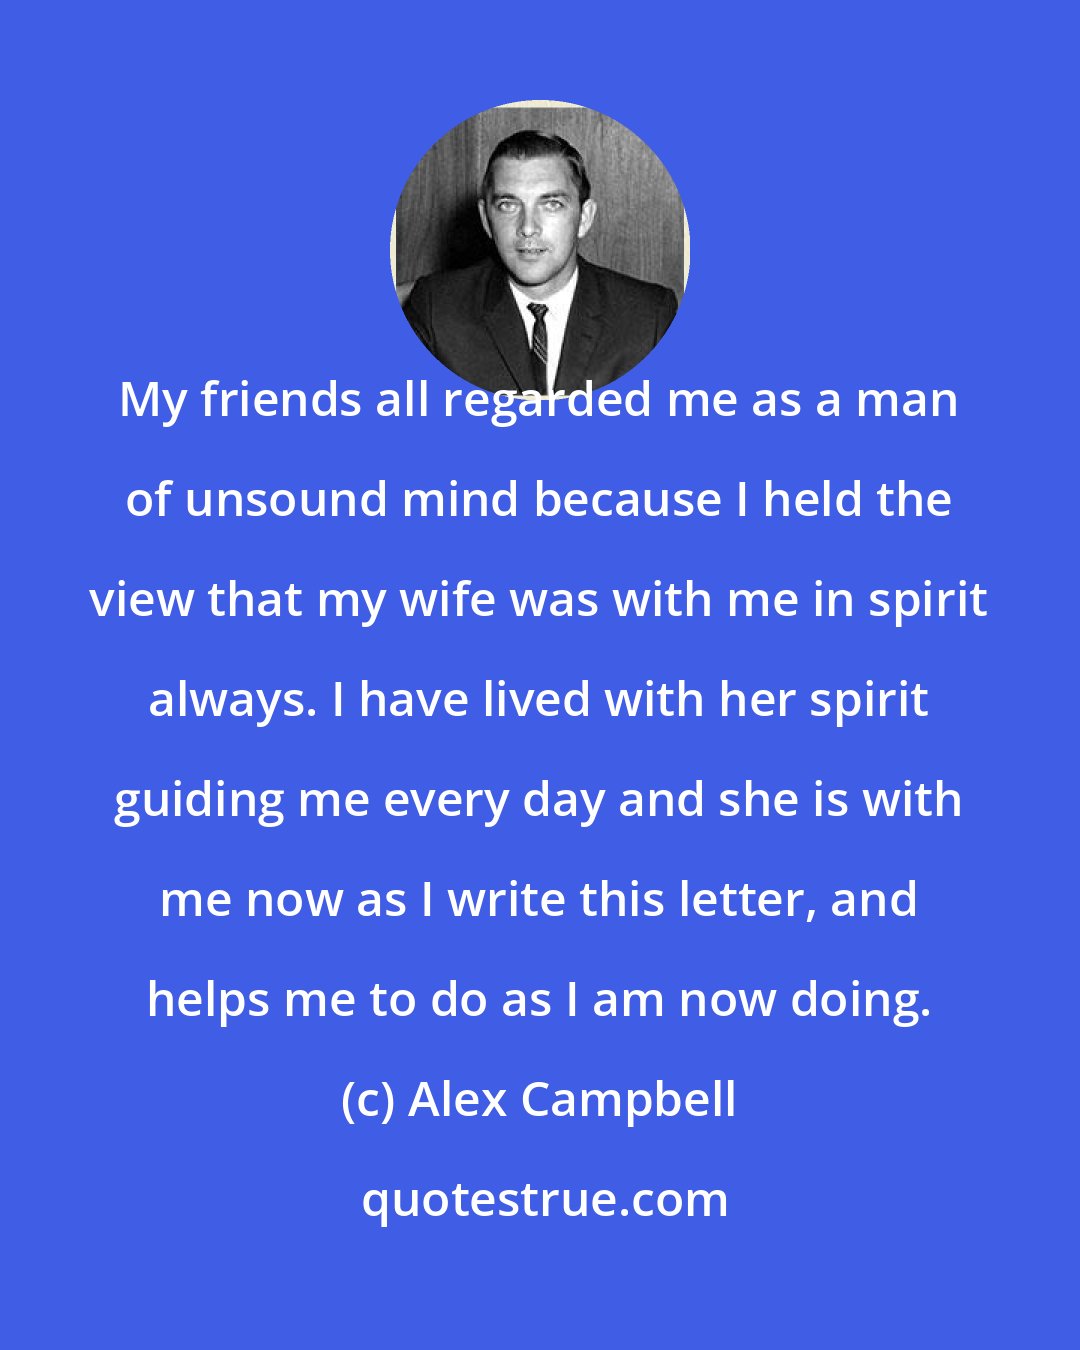 Alex Campbell: My friends all regarded me as a man of unsound mind because I held the view that my wife was with me in spirit always. I have lived with her spirit guiding me every day and she is with me now as I write this letter, and helps me to do as I am now doing.